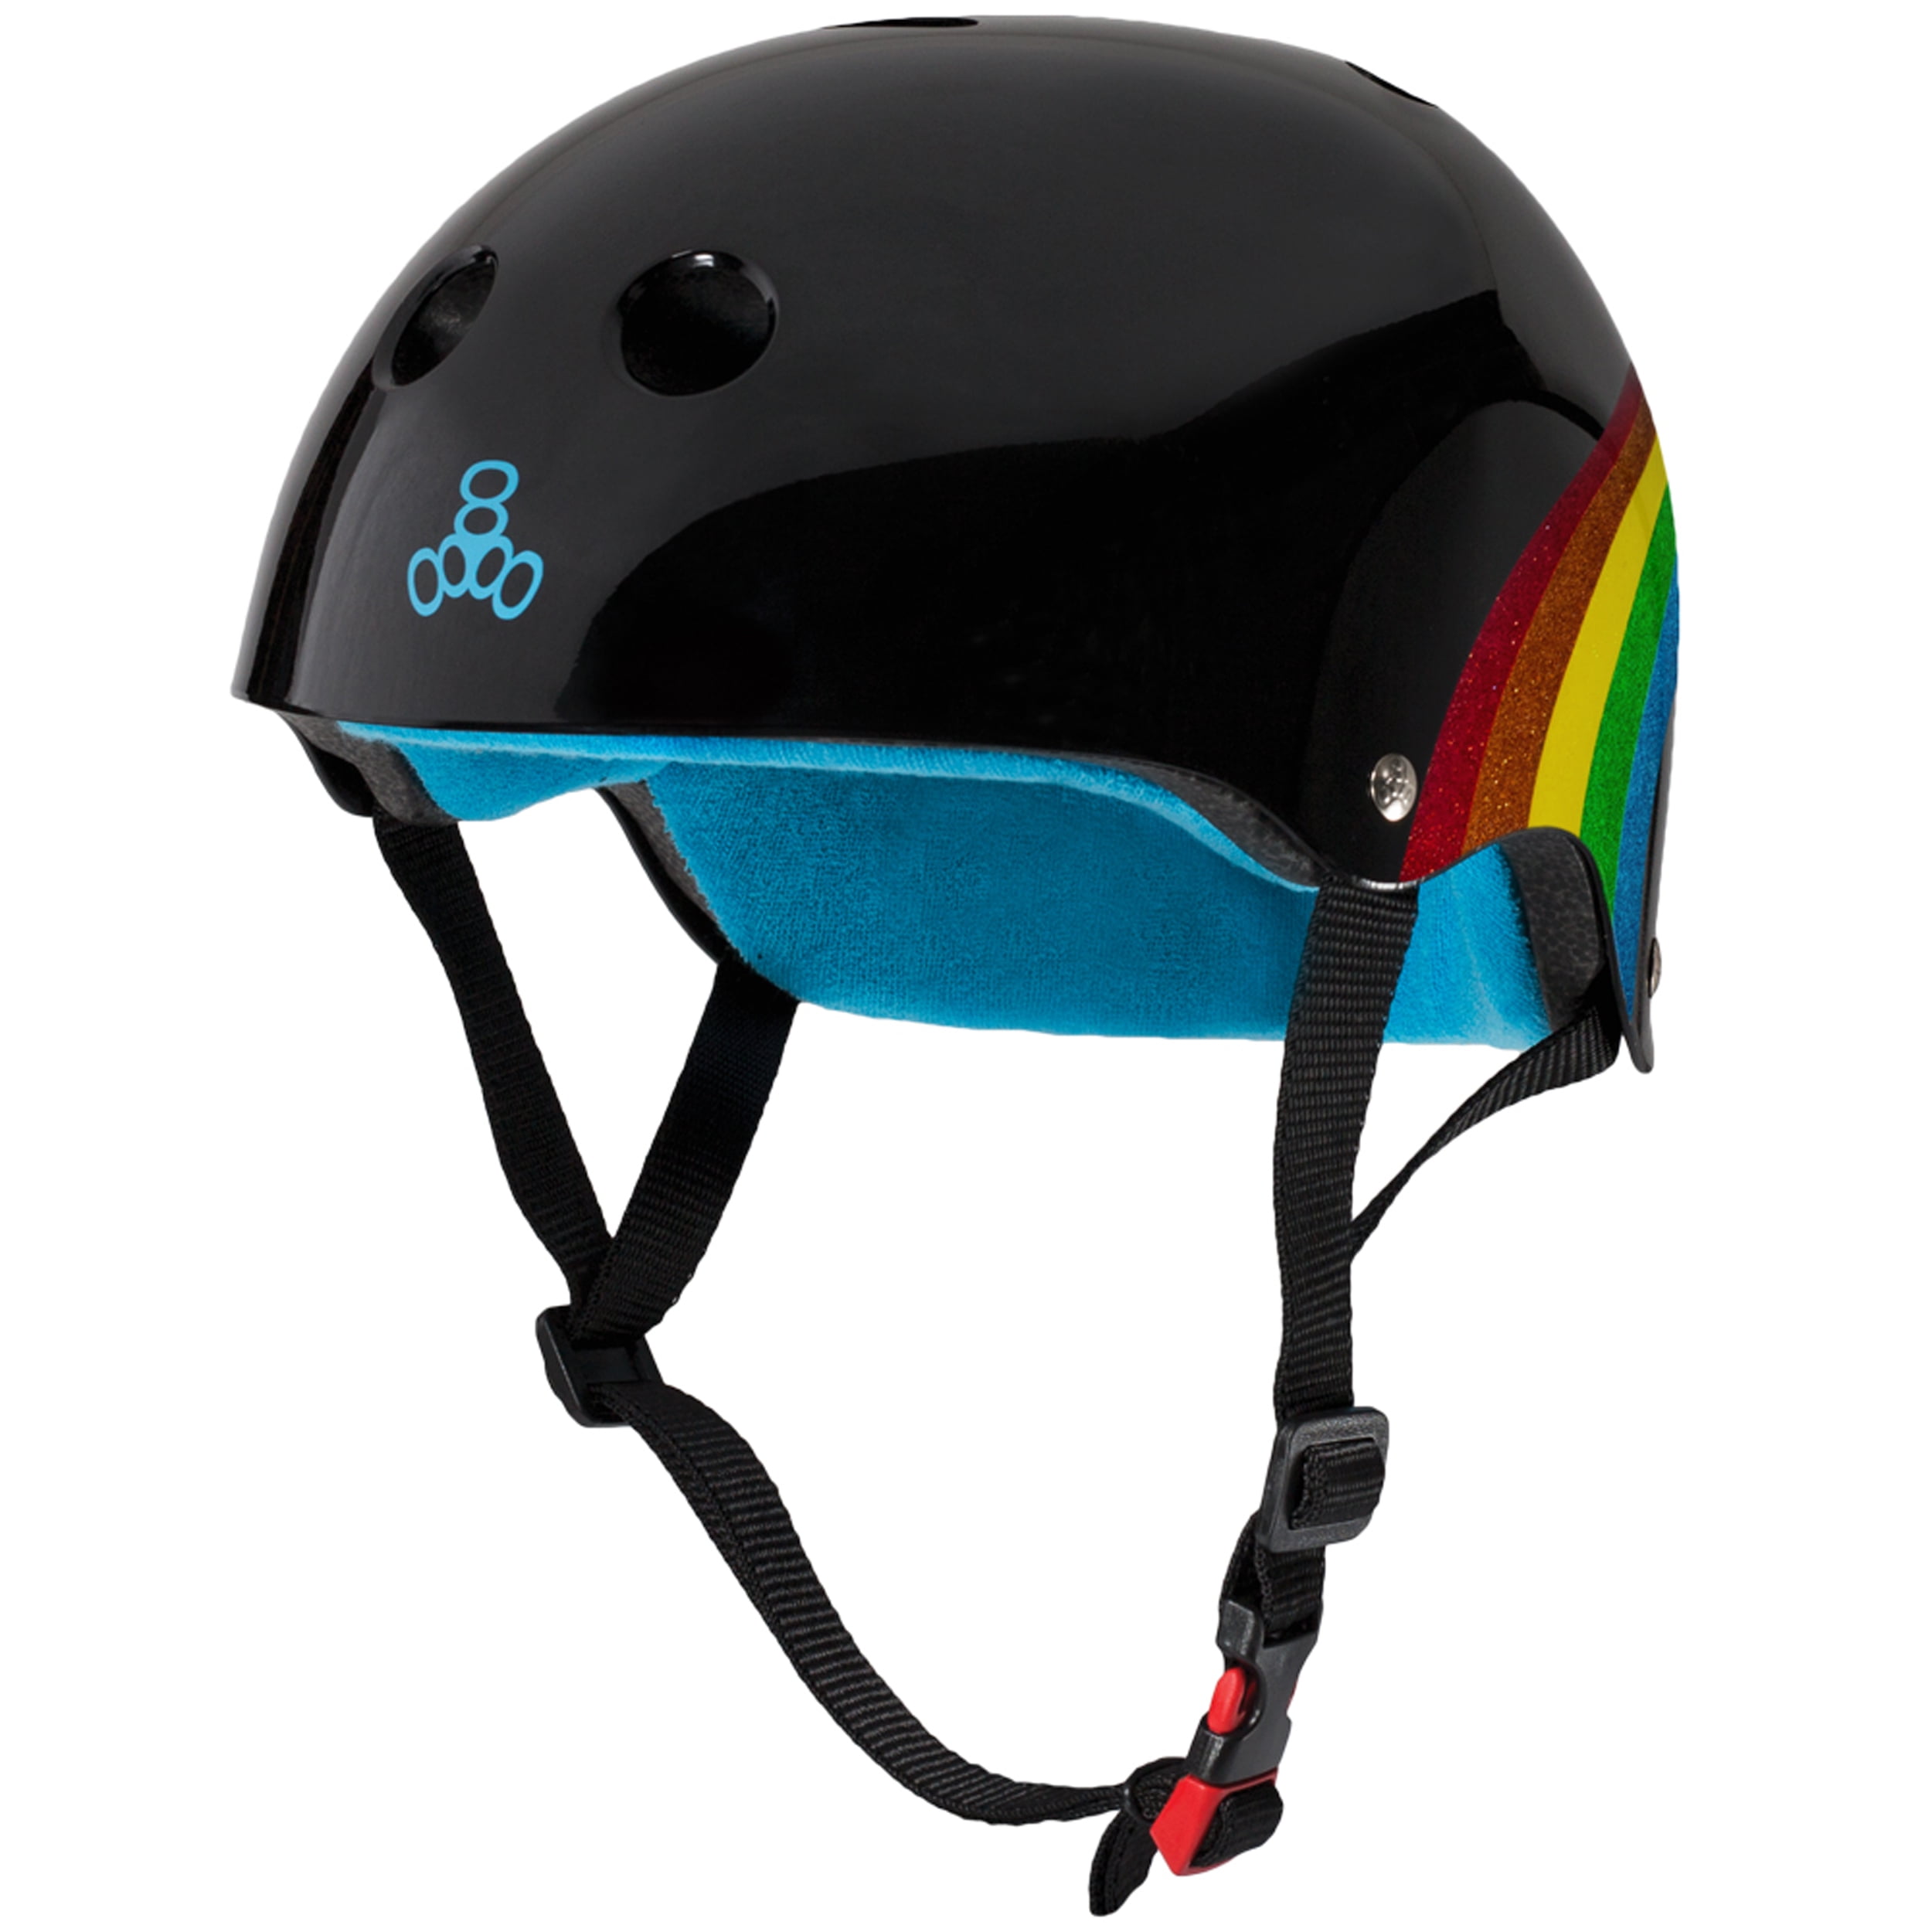 Triple Eight THE Certified Sweatsaver Helmet for Skateboarding, BMX, and  Roller Skating, Rainbow Sparkle Black, X-Small / Small